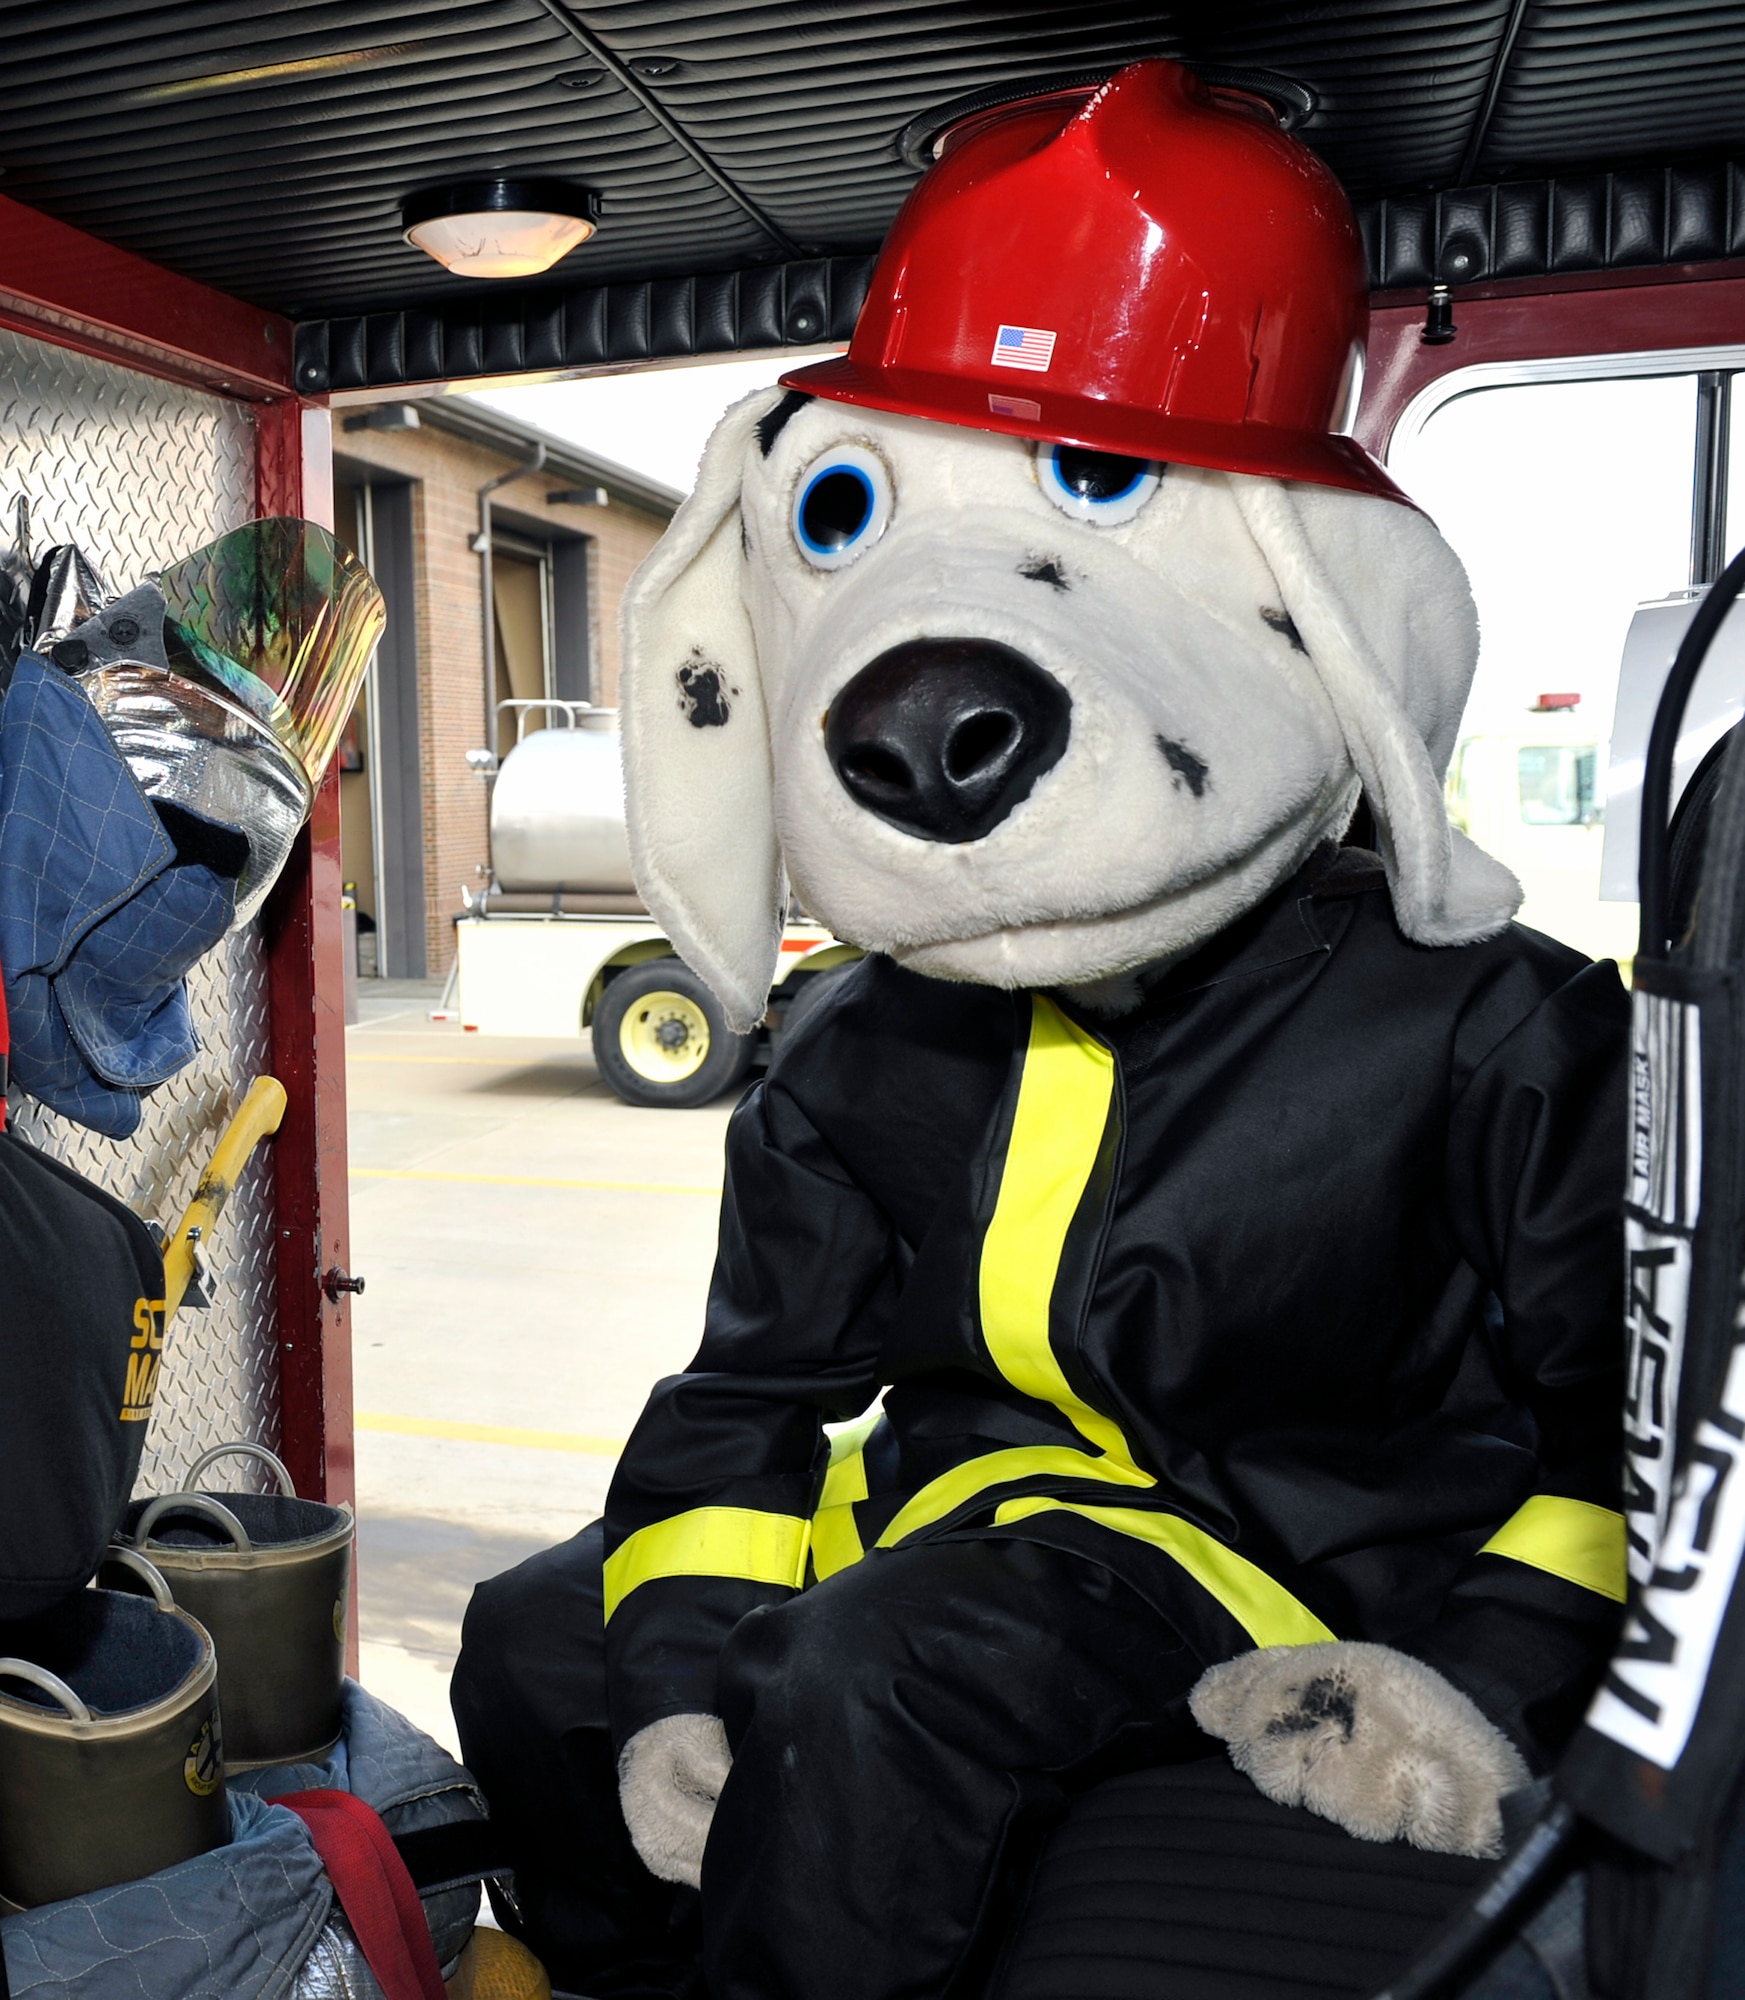 Airman 1st Class Curtis Sinkfield, 19th Civil Engineering Squadron fire fighter, takes time to pose as Sparky inside a fire truck.  The fire truck Sparky’s in is the first fire truck to be called to any fire incident on base. (U.S. Air Force photo by Airman 1st Class Lausanne Pacheco)